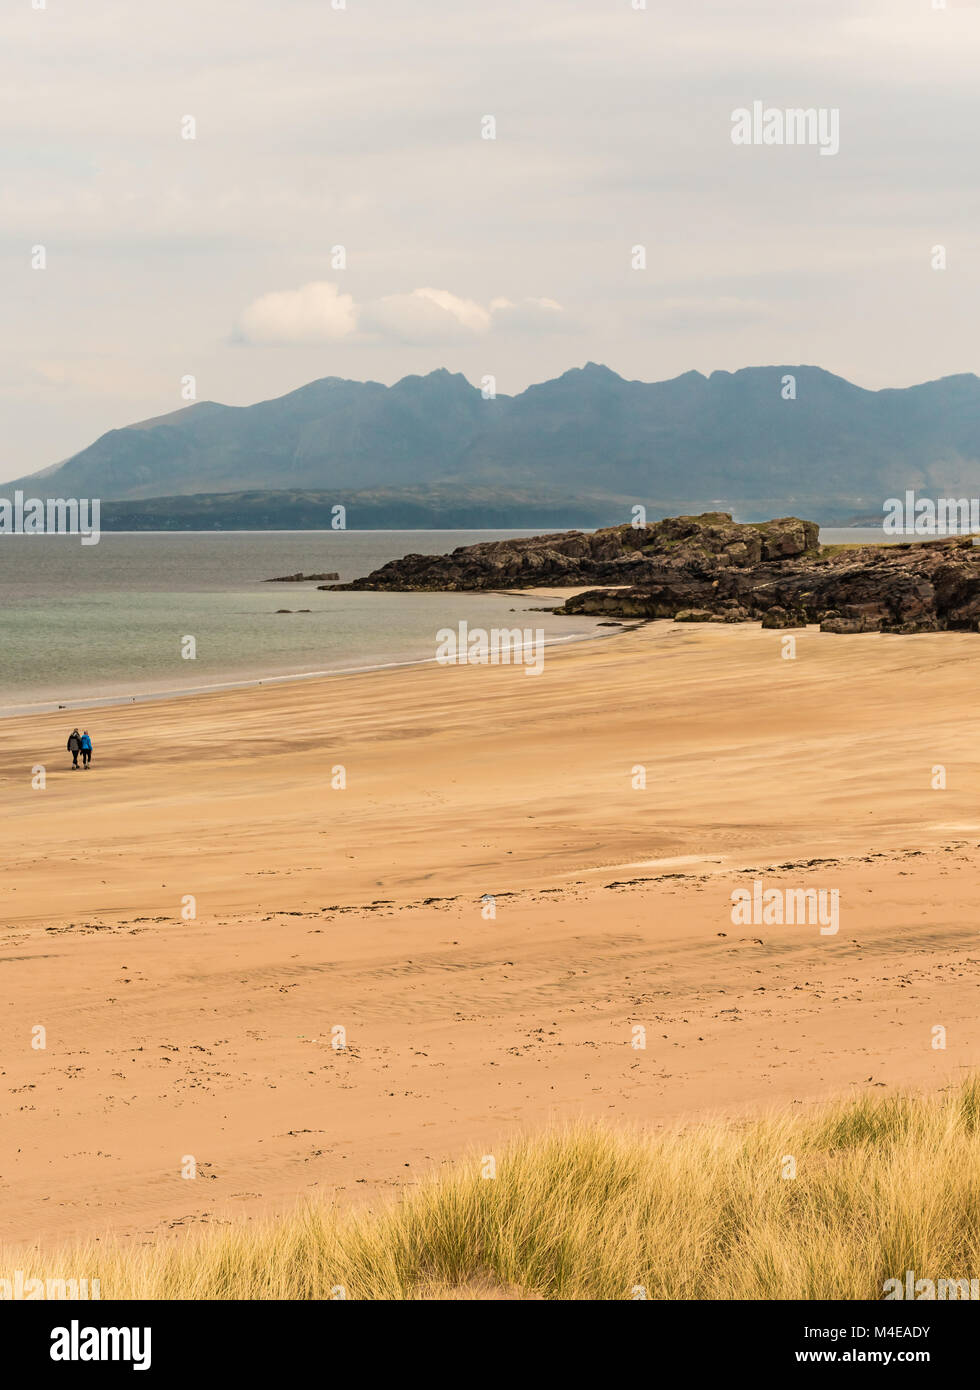 Isle of Skye as seen from a beach on the Isle of Rum Stock Photo